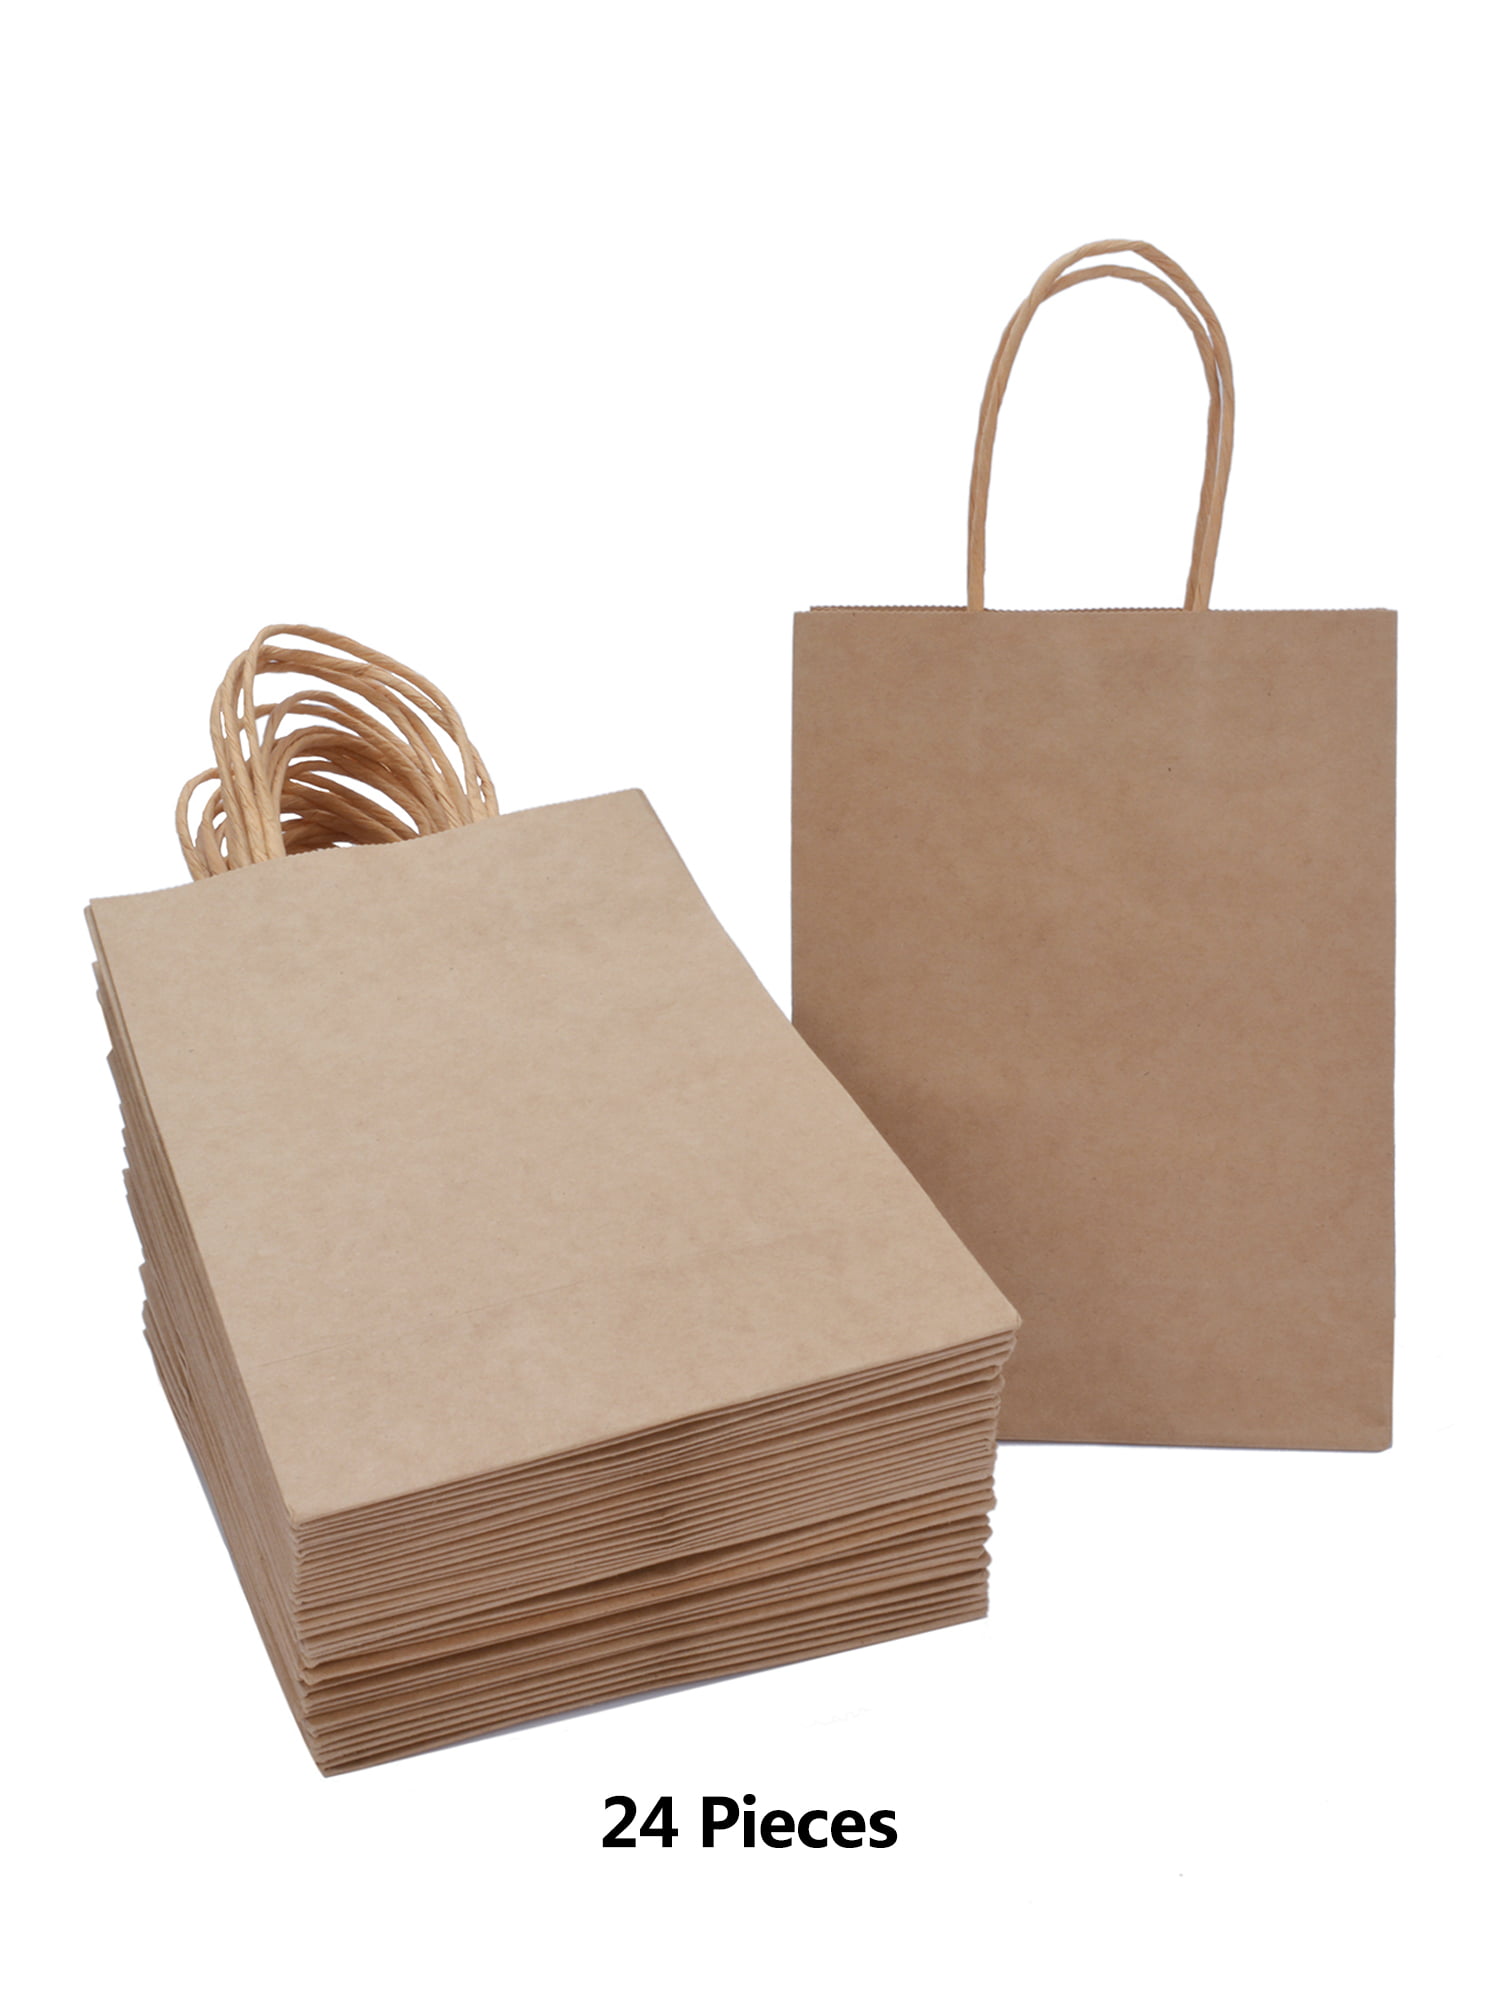 3 x Medium Classic Luxurious Christmas Gift Bag Strong Paper Bags 